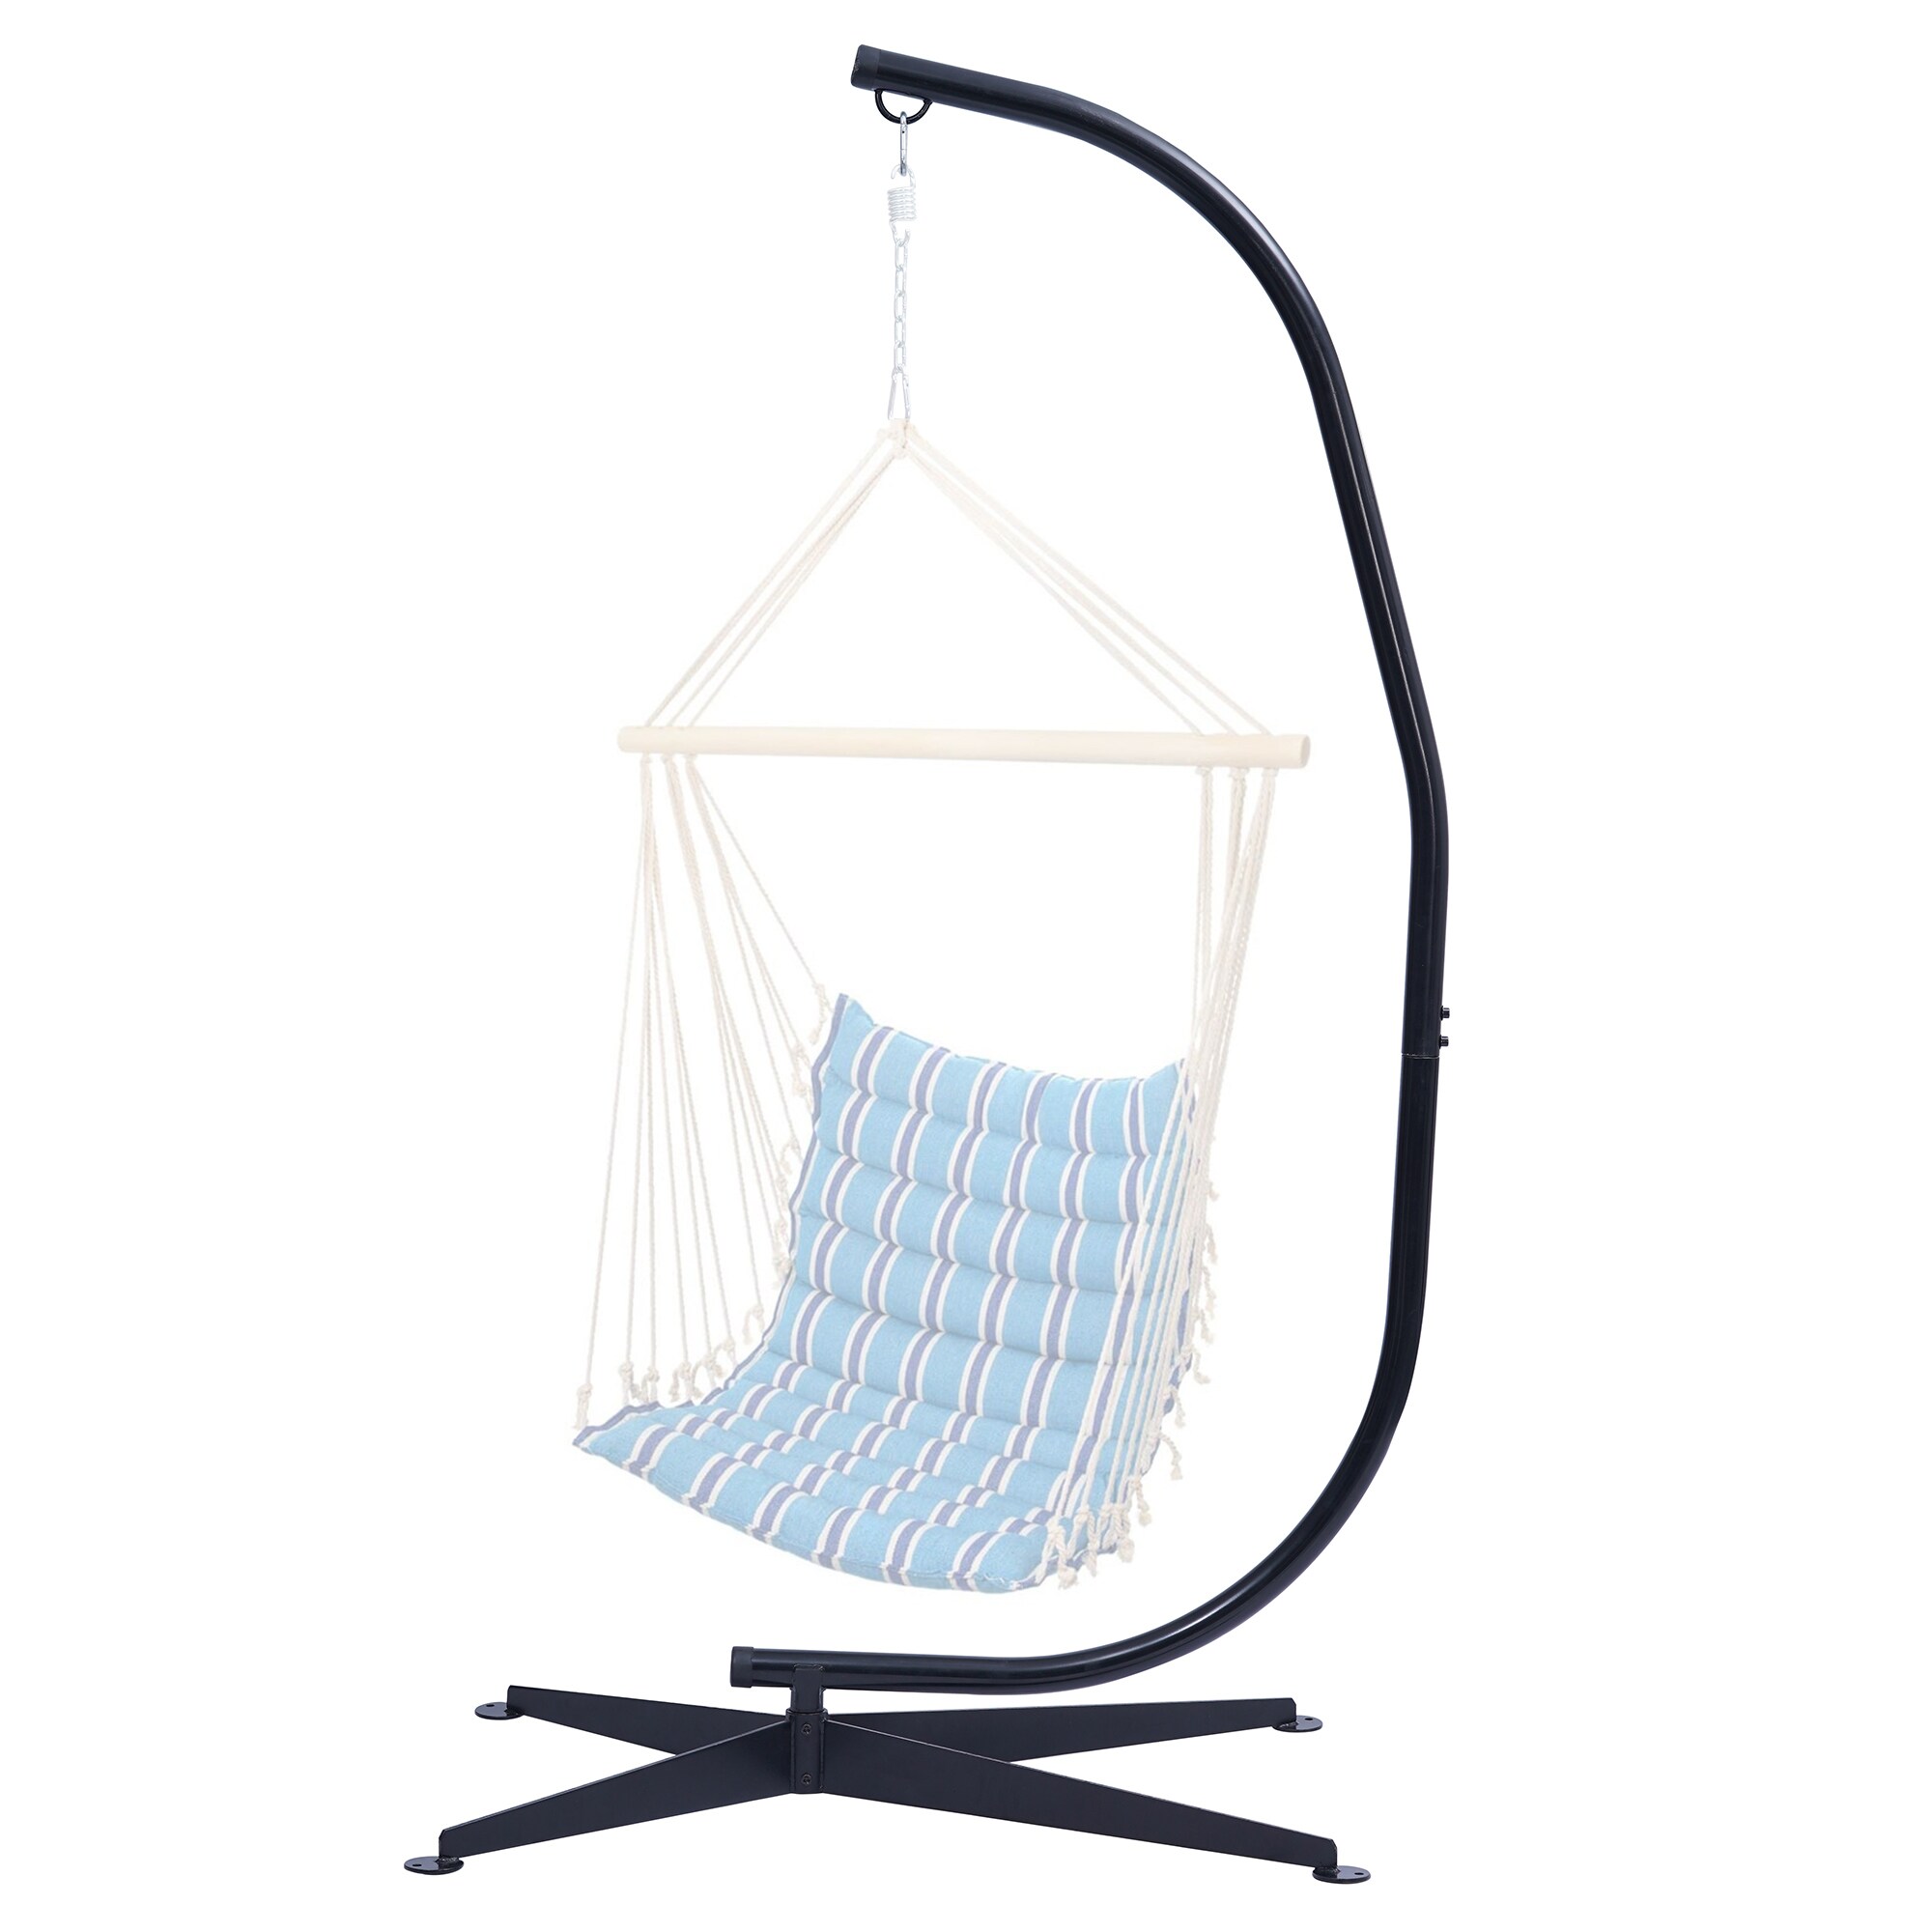 Solid Steel Construction C Shape For Air Porch Swing Any Hanging Chair Ideal for Oudoor and Indoor Bedroom Weight Capacity 300 LBS Flexzion Hammock C Stand Black 